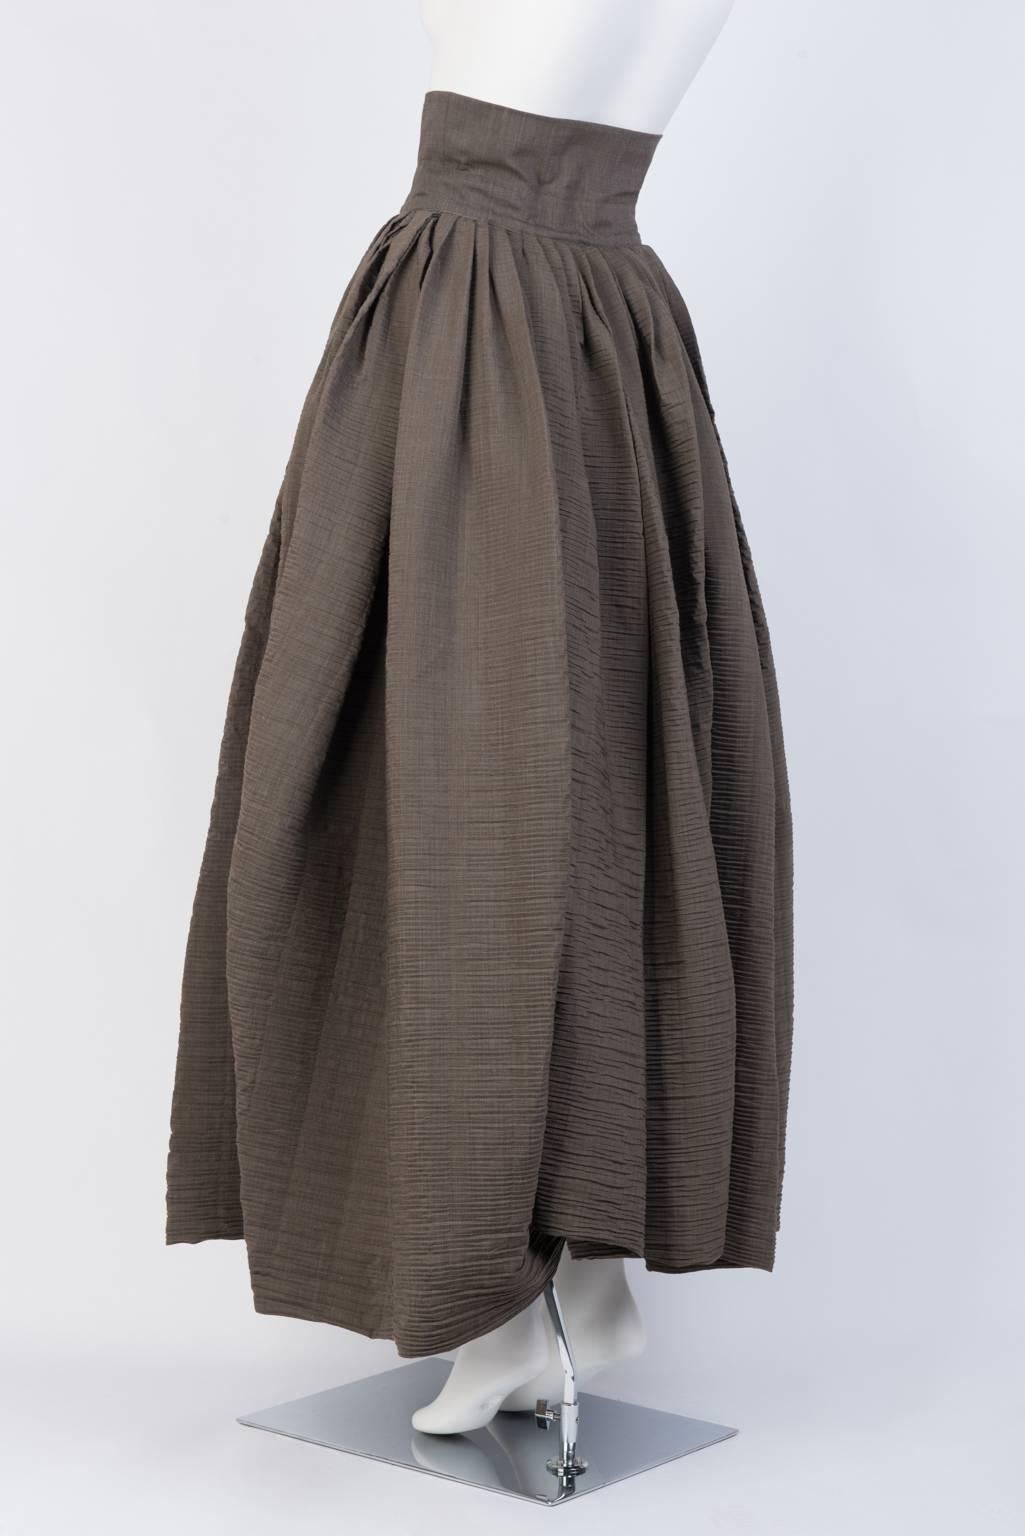 Voluminous, pleated Maxi skirt, unlined, with high, wide 3 button waistband.